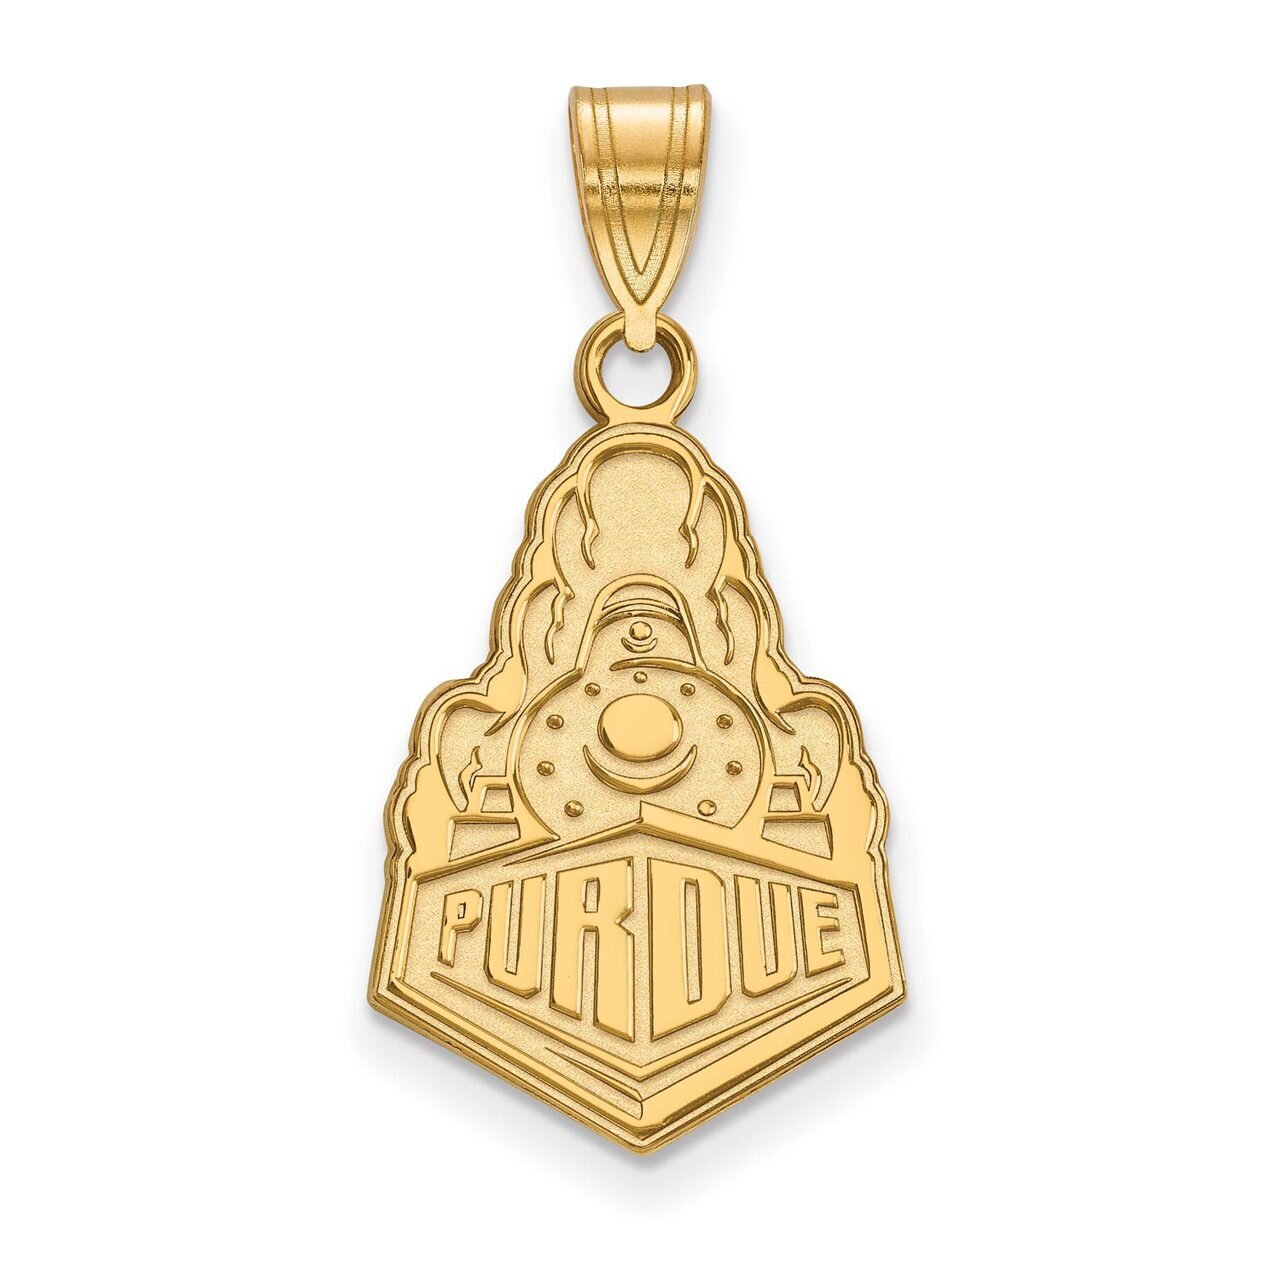 Purdue Large Pendant 14k Yellow Gold 4Y039PU